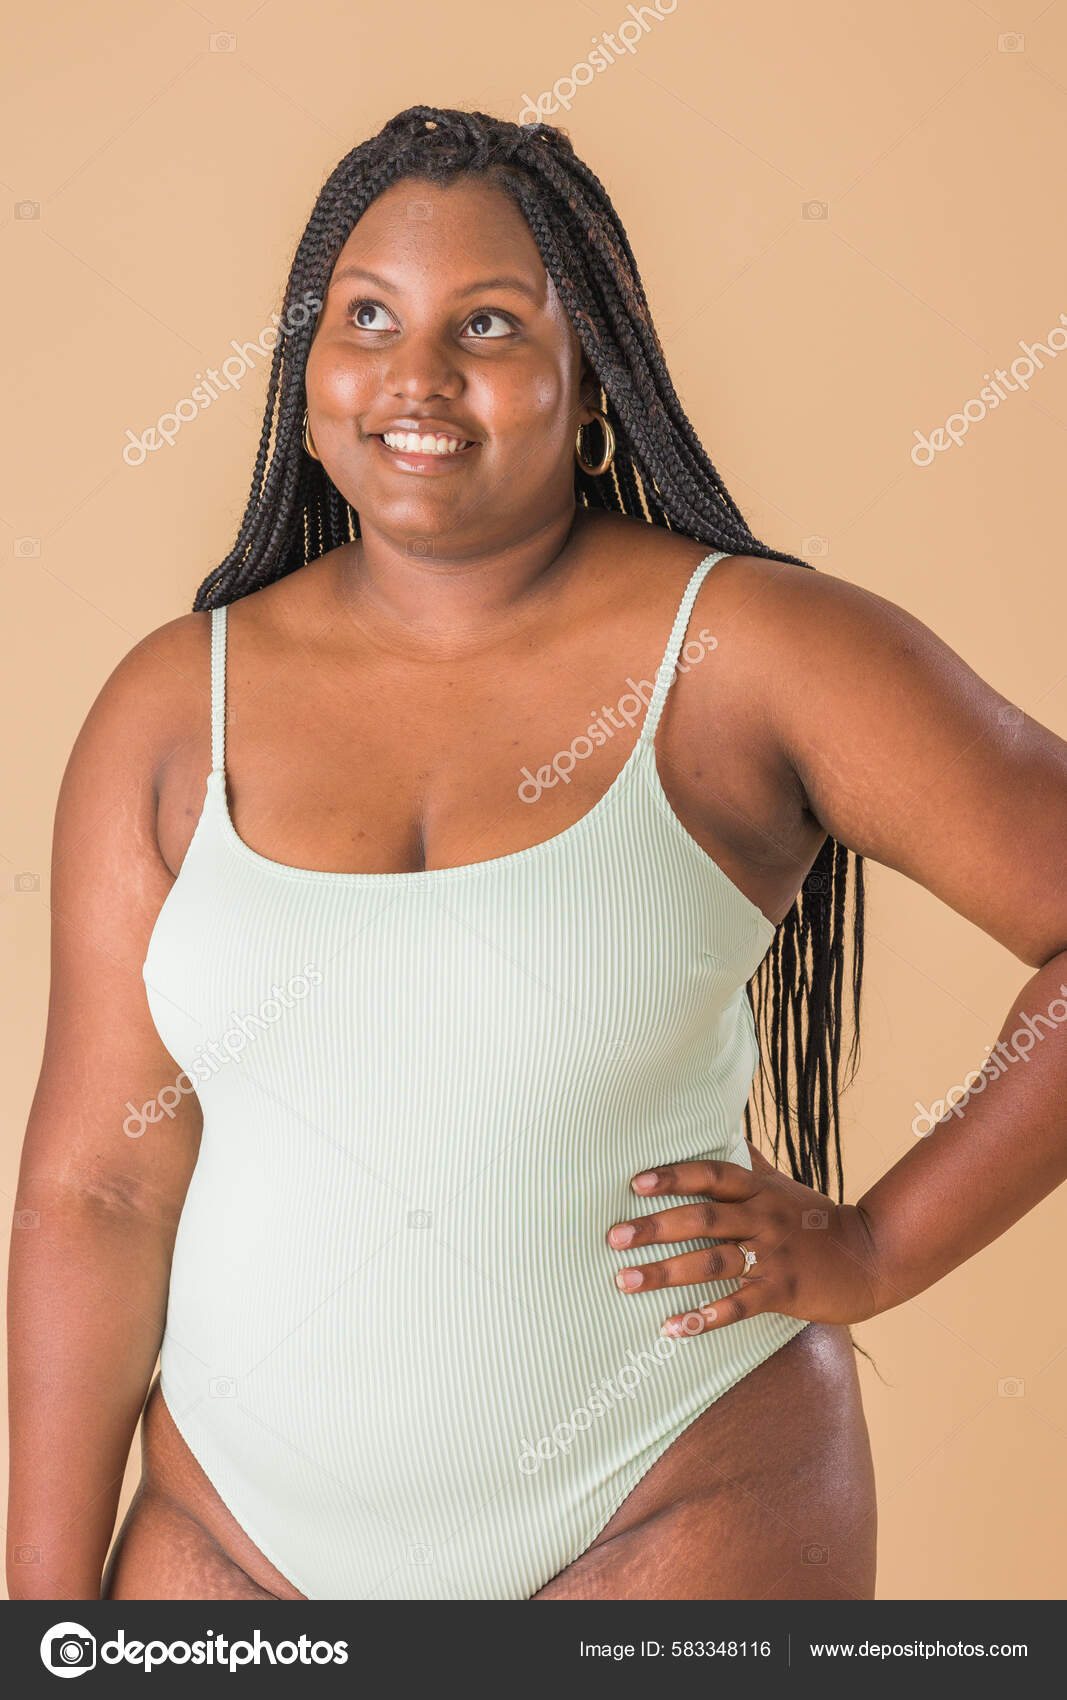 Beauty Caribbean Black African American Unaltered Imagery Studio